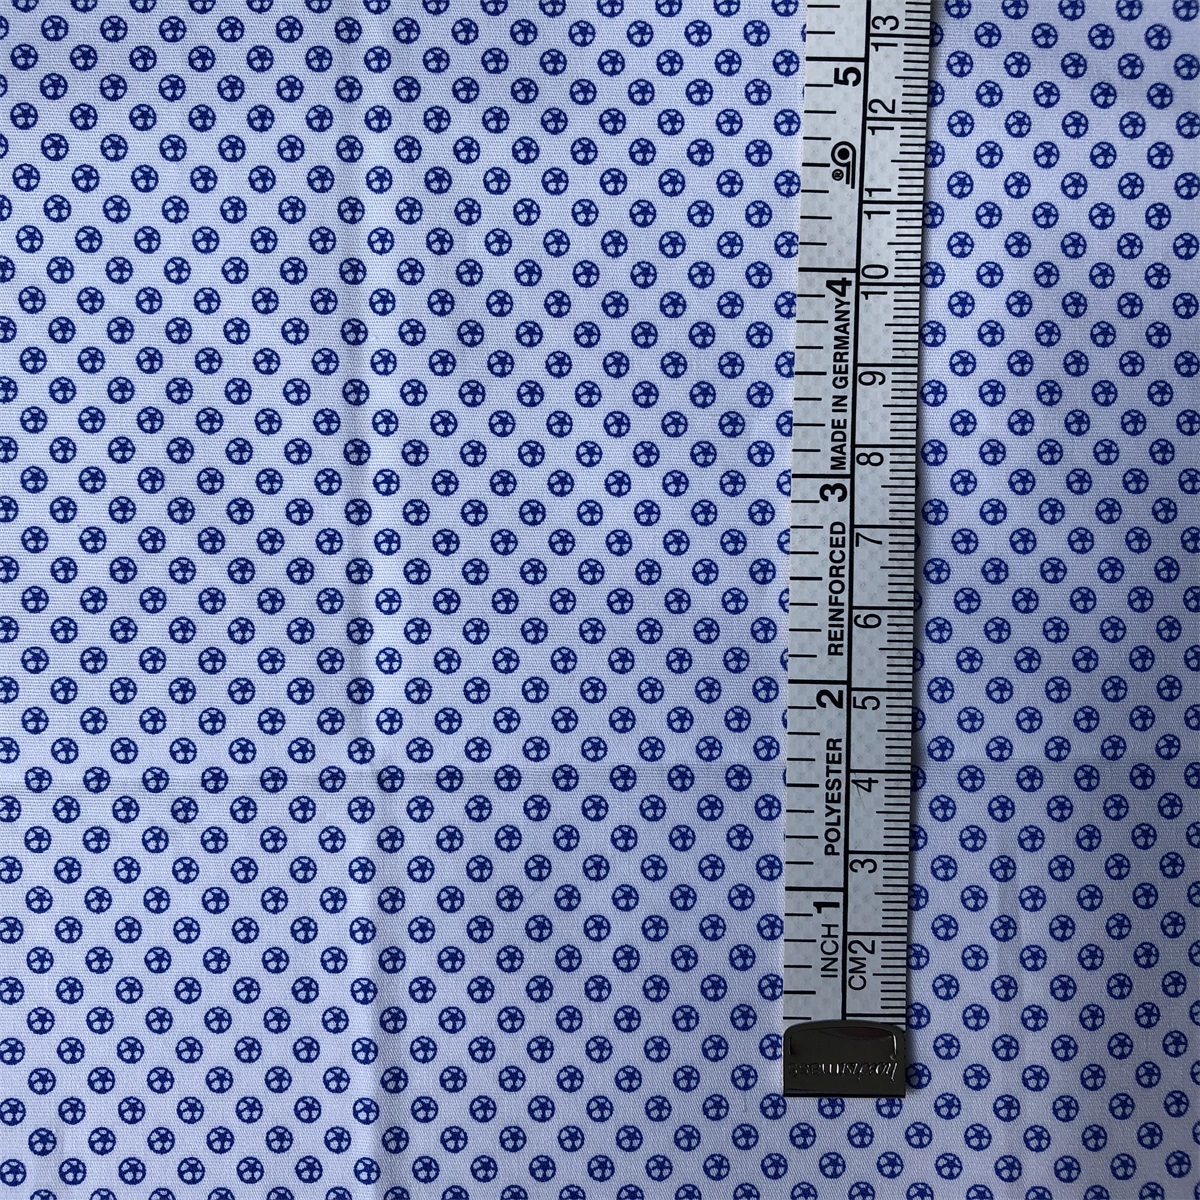 Cotton Spandex Printed Fabric by compact yarn for men's shirts 98% cotton 2% spandex poplin printed shirts woven elasthane fabric